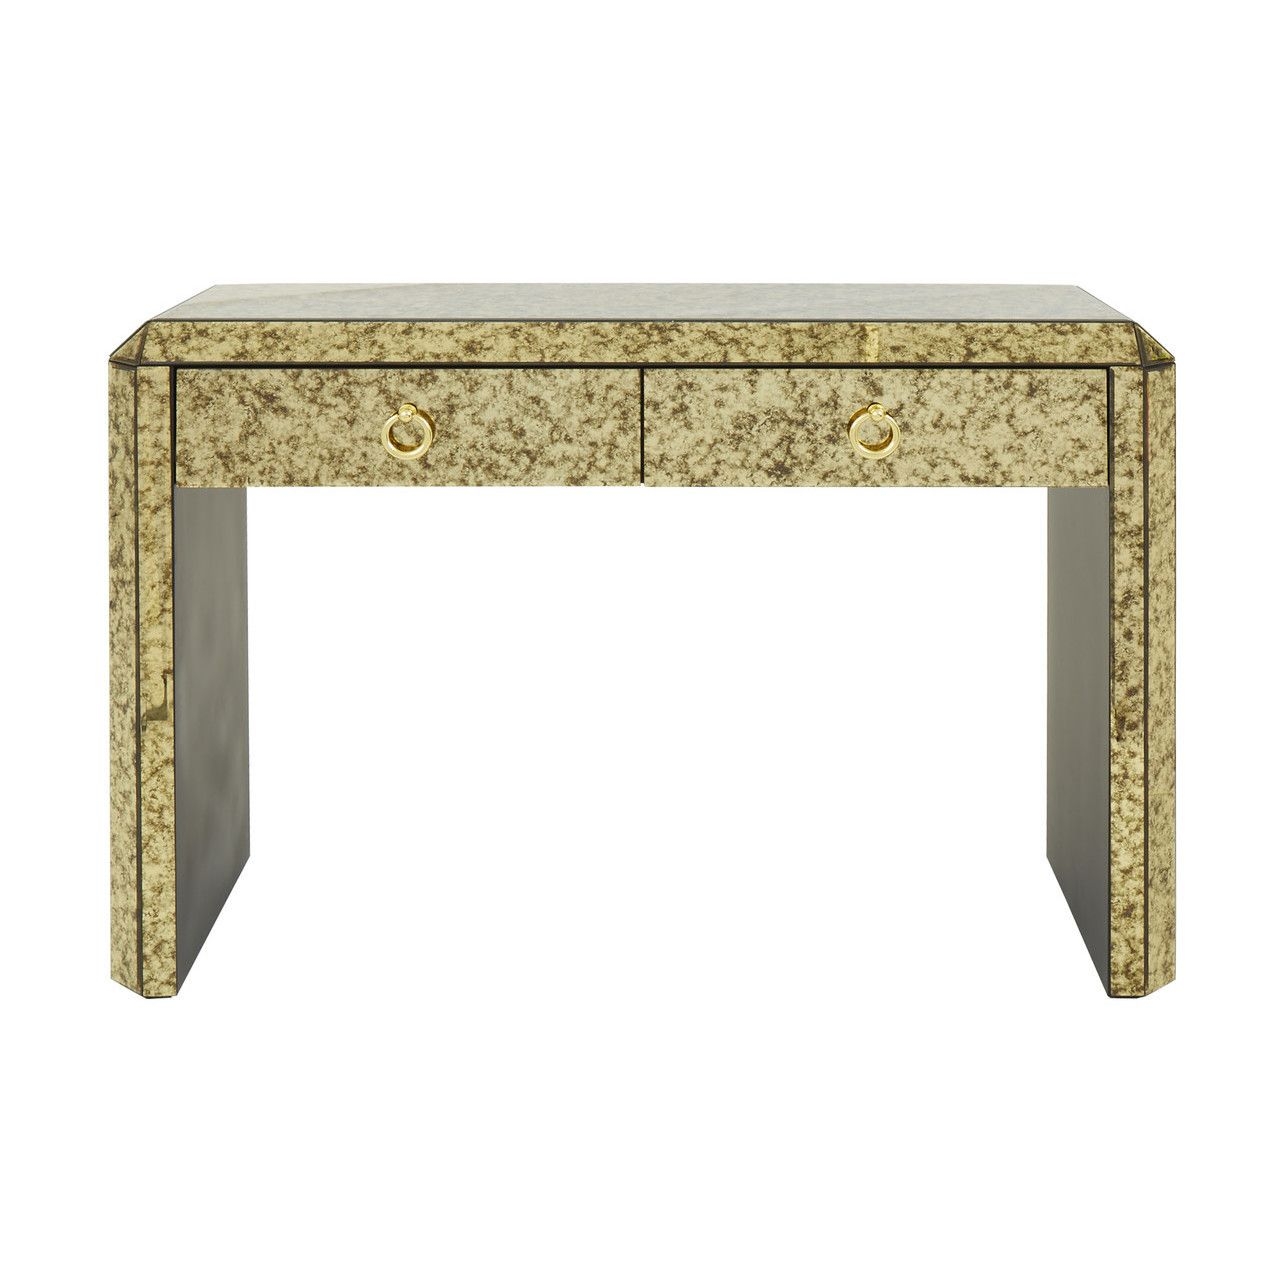 Komo Mirrored Glass Console Table In Antique Gold